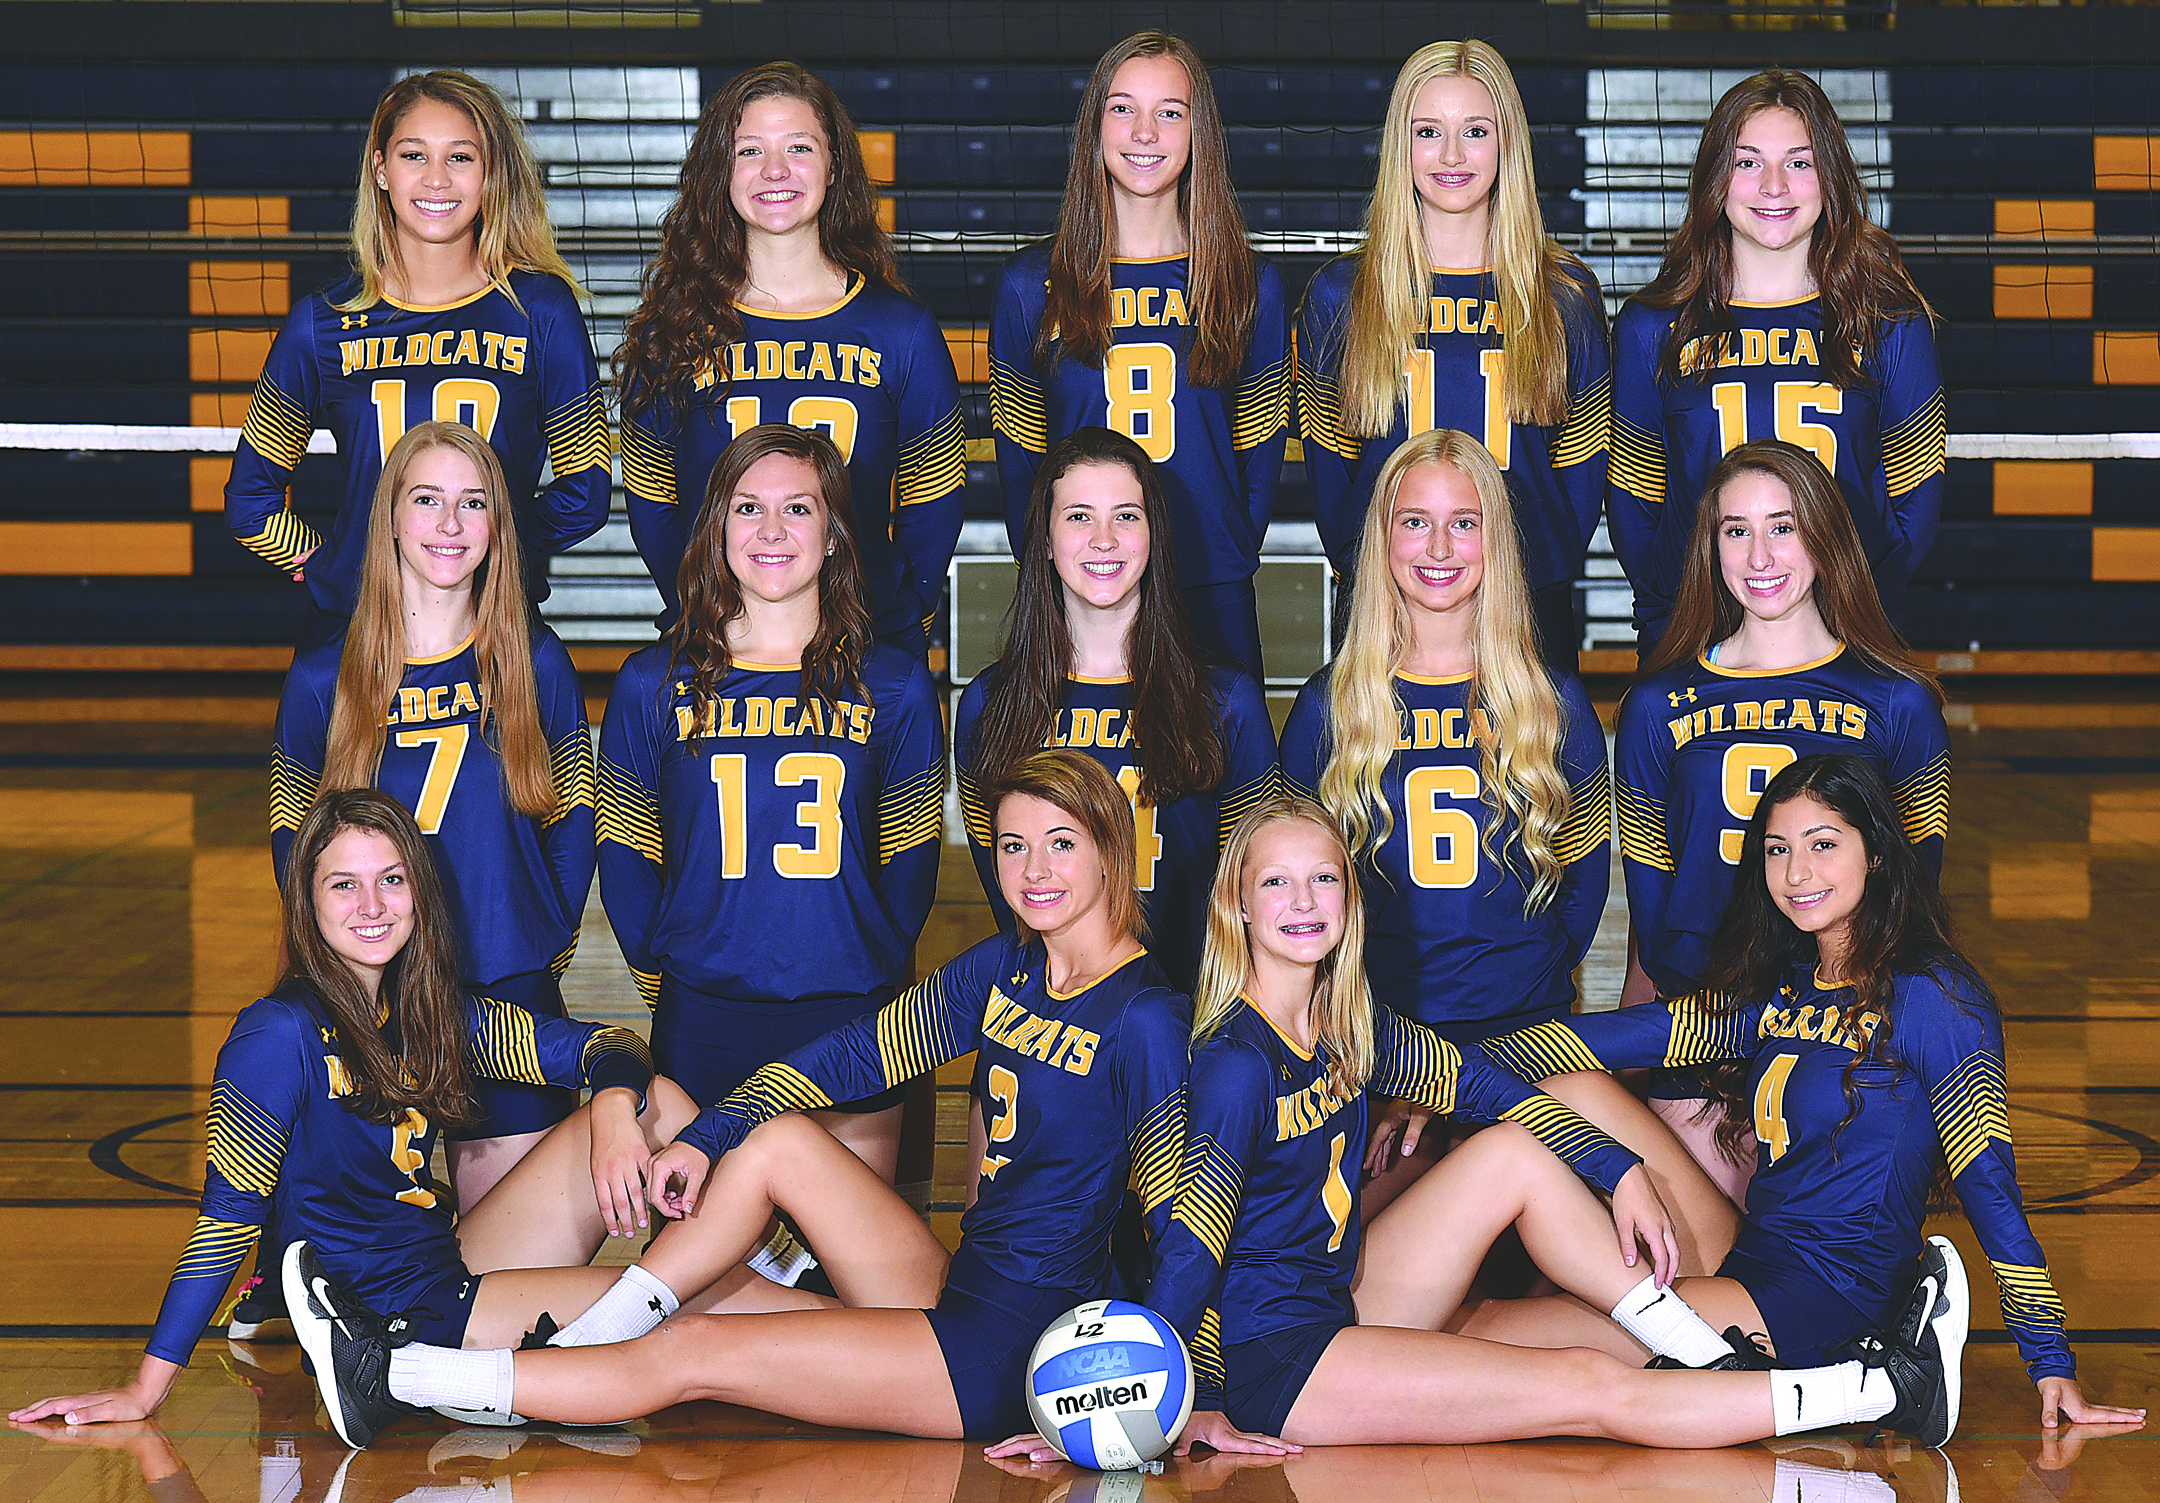 Front row (from left): McKenzie Miller, Alyssa DeTone, Raegan Bell and Anna Ibarra. Middle (from left): Anna Trbovich, Anna Peruski, Peyton Krajcarski, Gabrielle Comito and Madelyn Weiss. Back row (from left): Alexia Kingham, Catherine Dobies, Sydney Richter, Emma LeBarge and Molly Miller. Photo by Visual Sports Network.